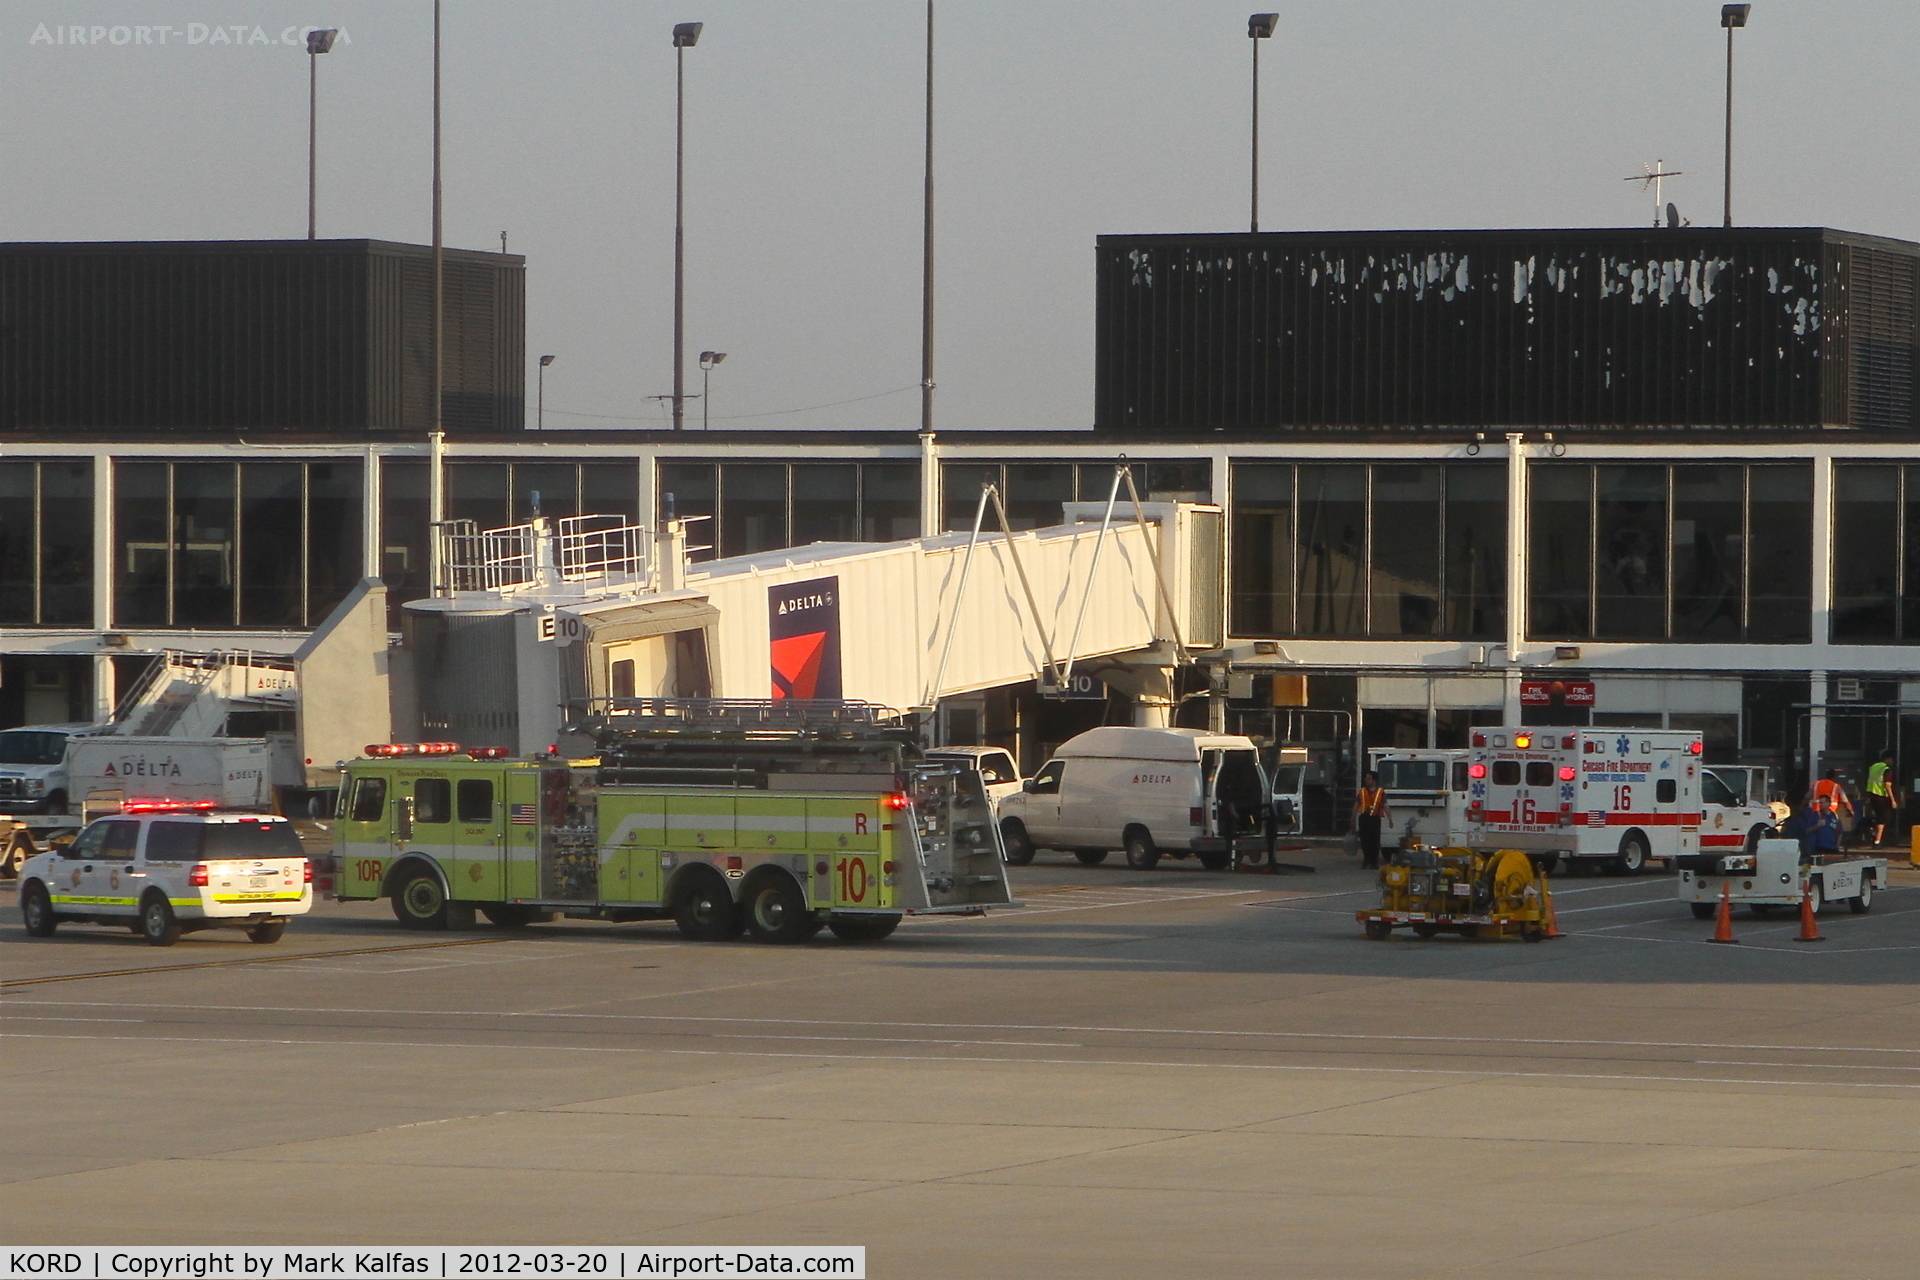 Chicago O'hare International Airport (ORD) - Chicago, Illinois - Chicago Fire Department - O'Hare Airport Rescue 2, Engine 10 and Ambulance 16   responding to a call at the Delta Airlines Terminal 2, Gate E10.